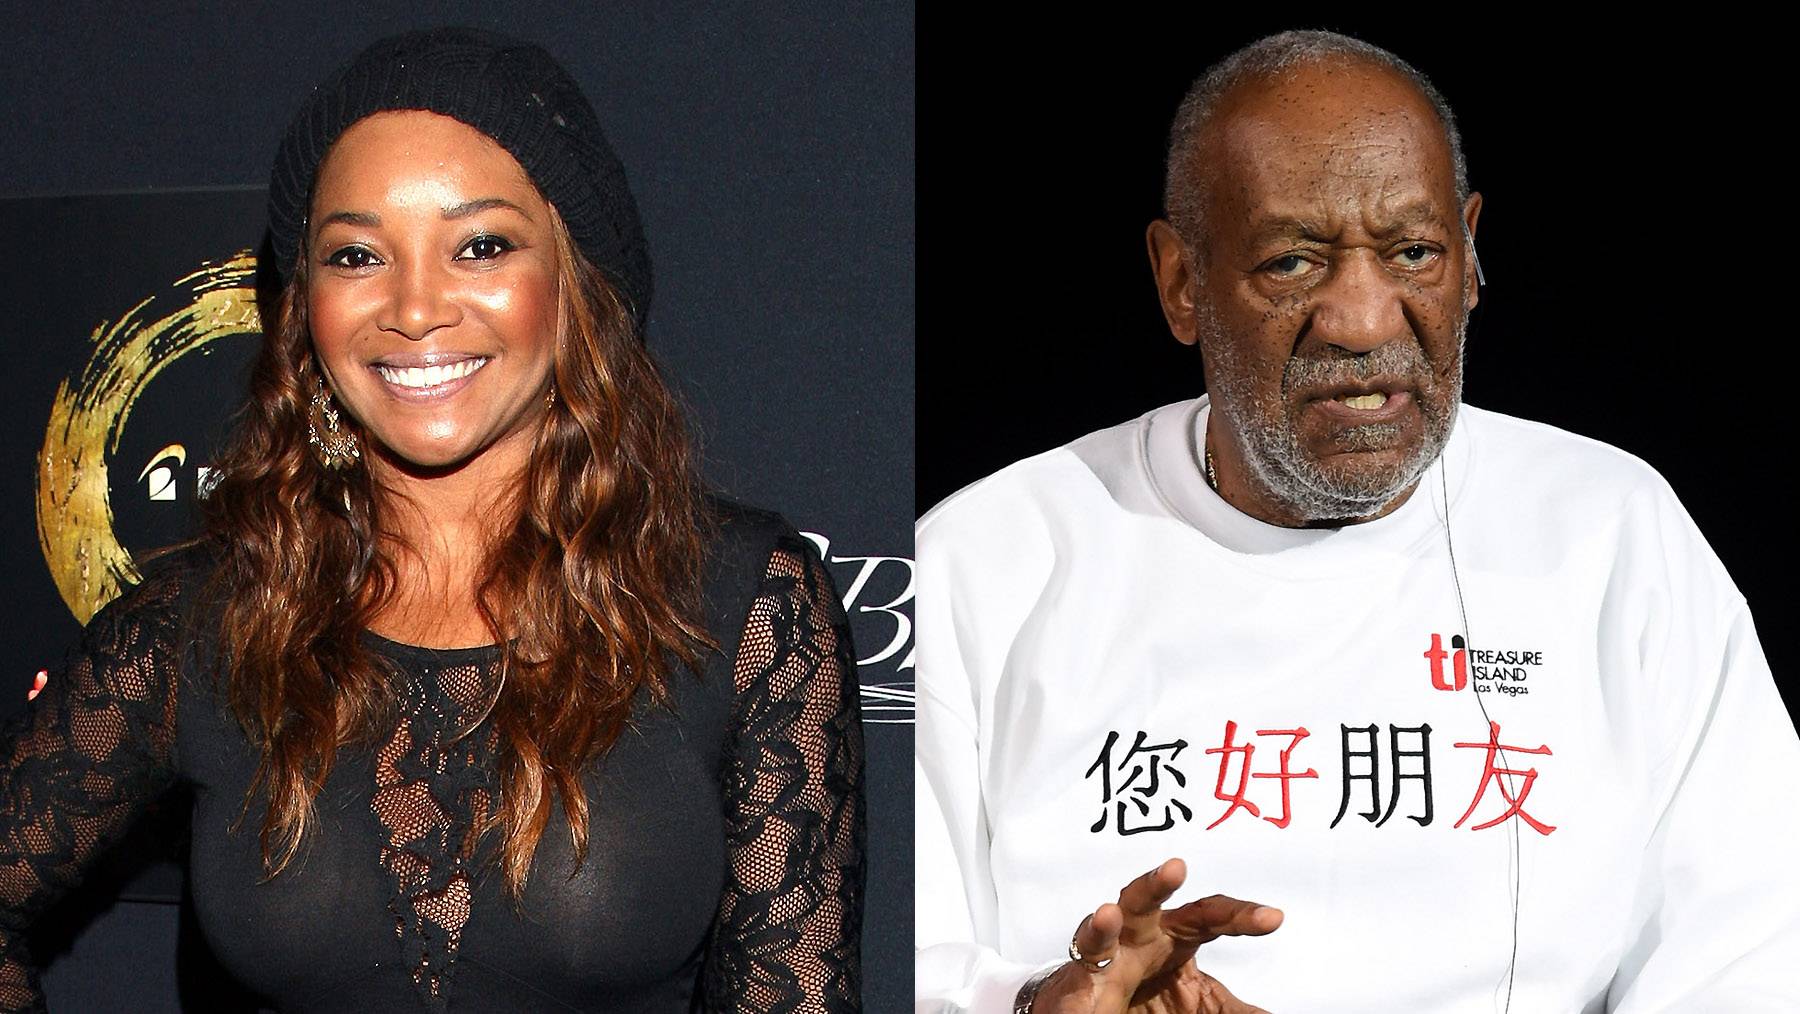 Tamala Jones Bill Cosby Disapproved Of Booty Call News Bet